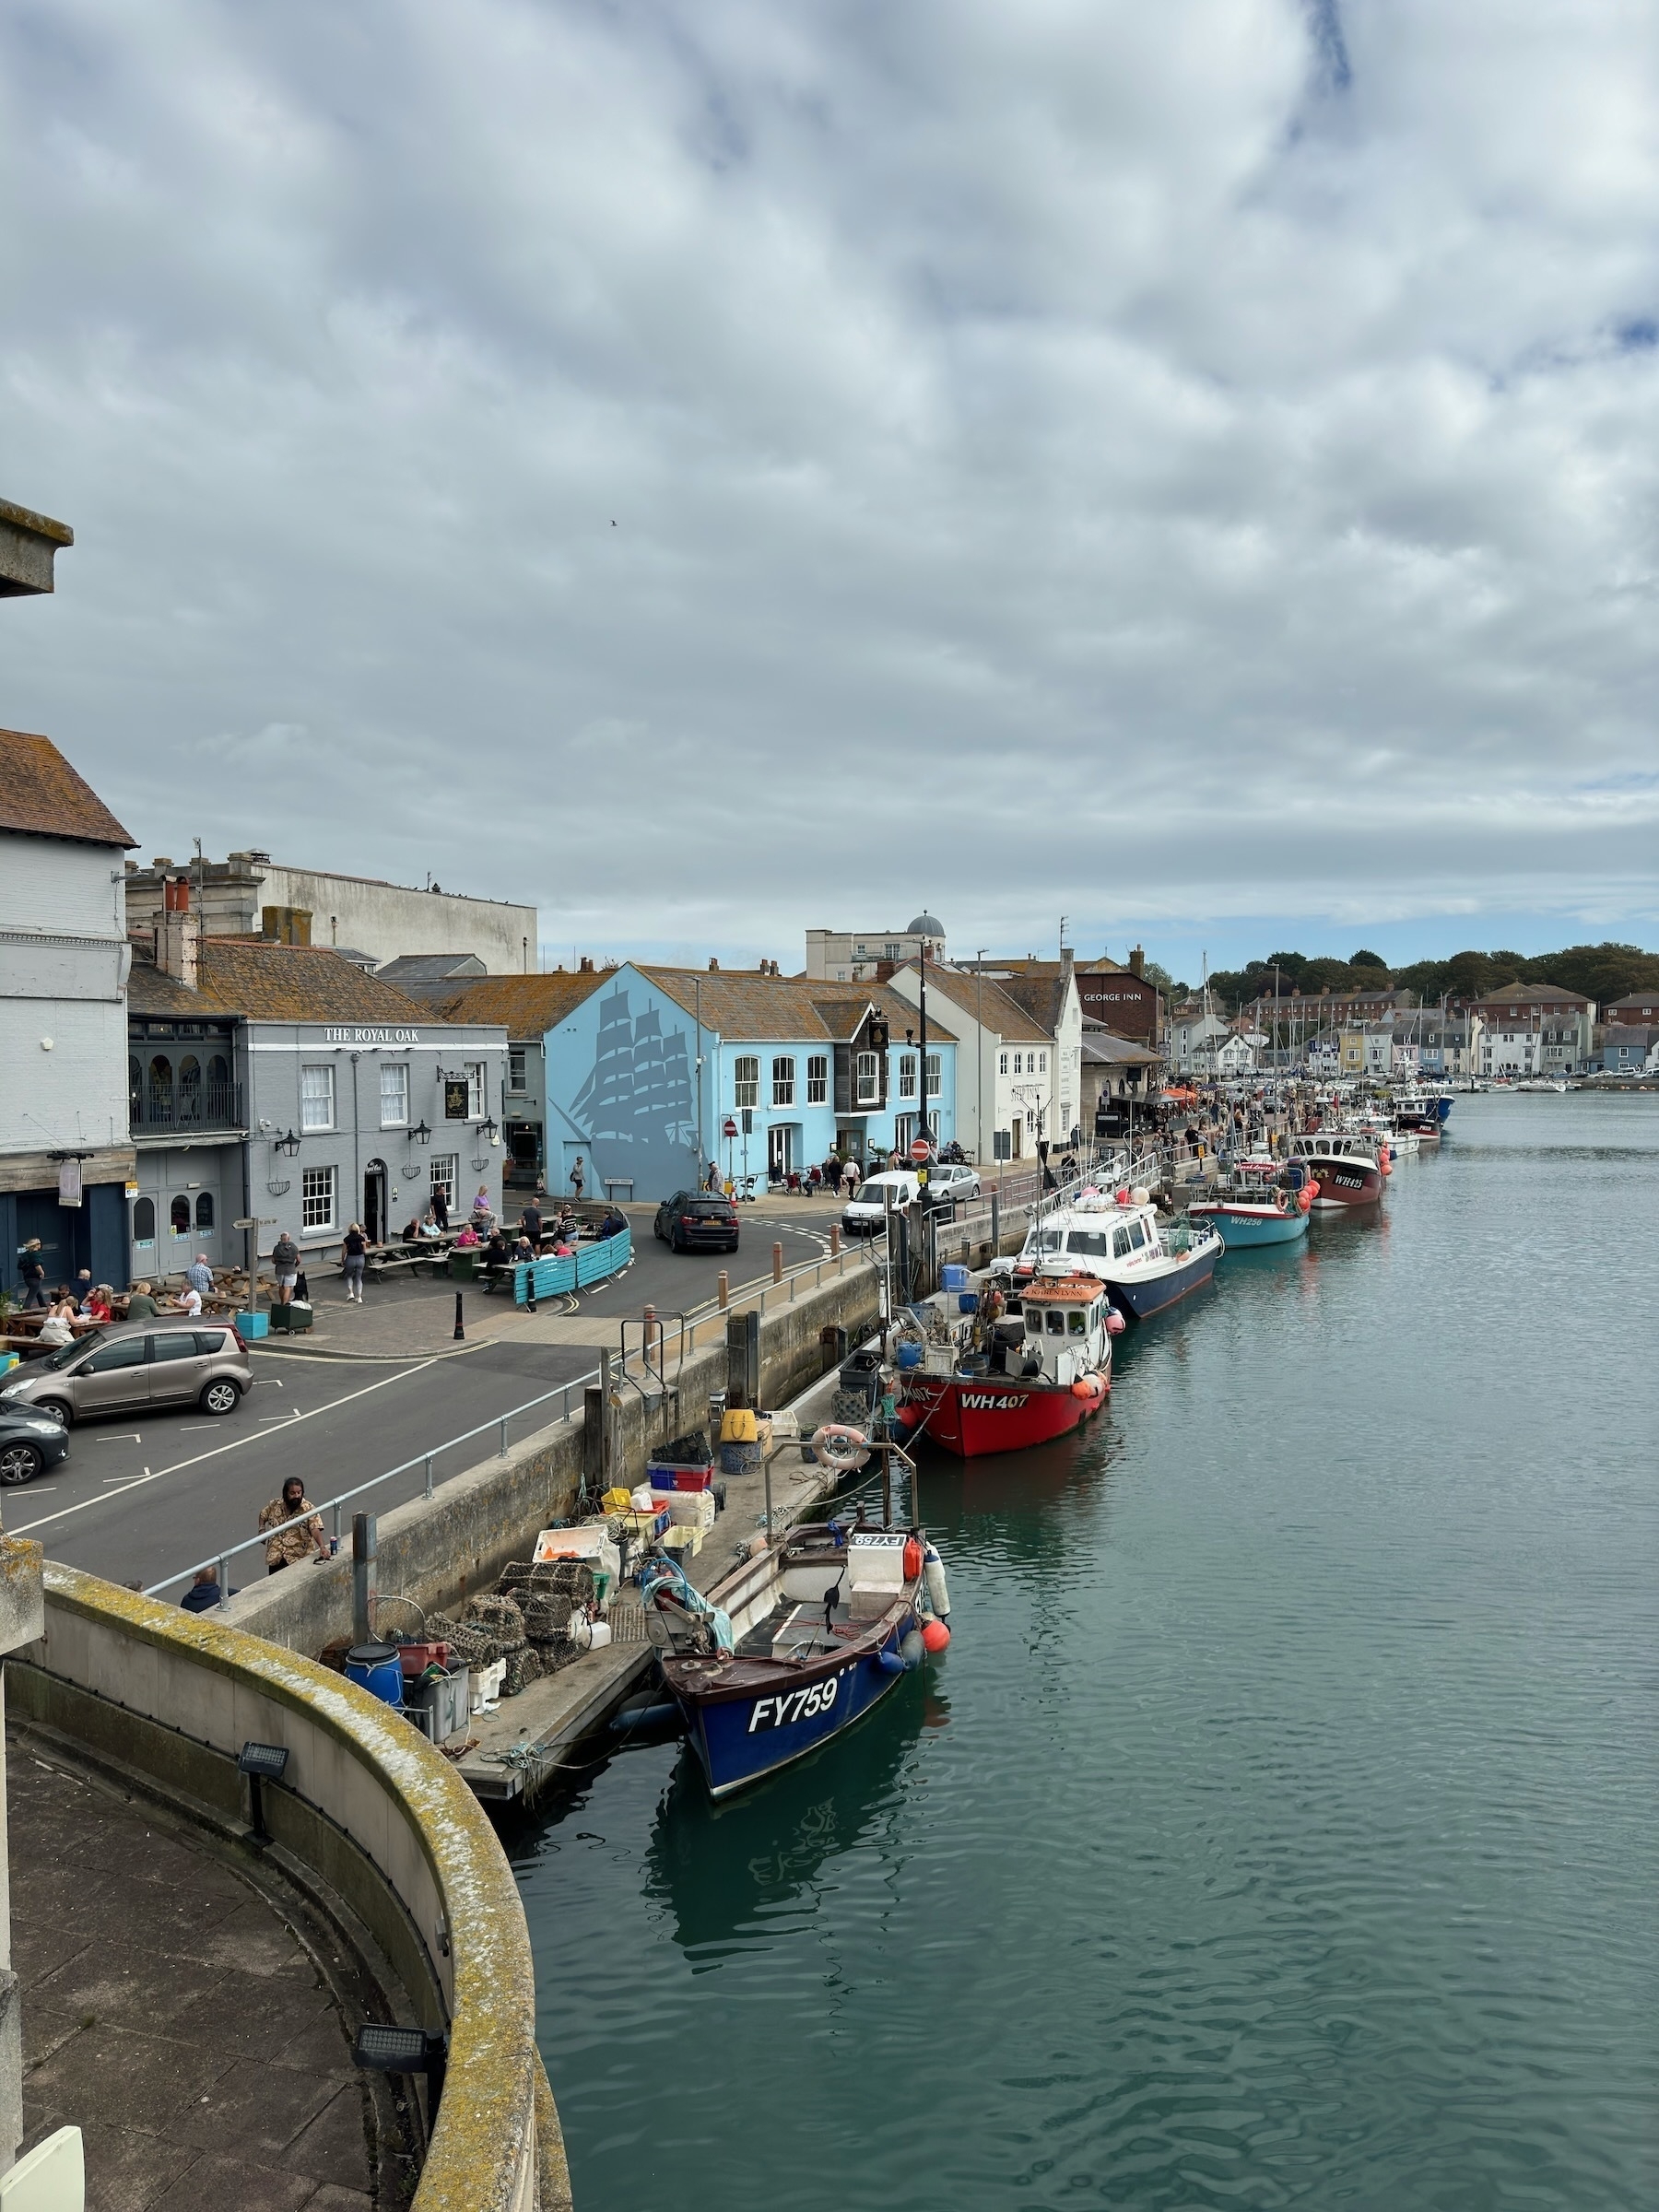 A photo of weymouth Harbour taken from the bridge